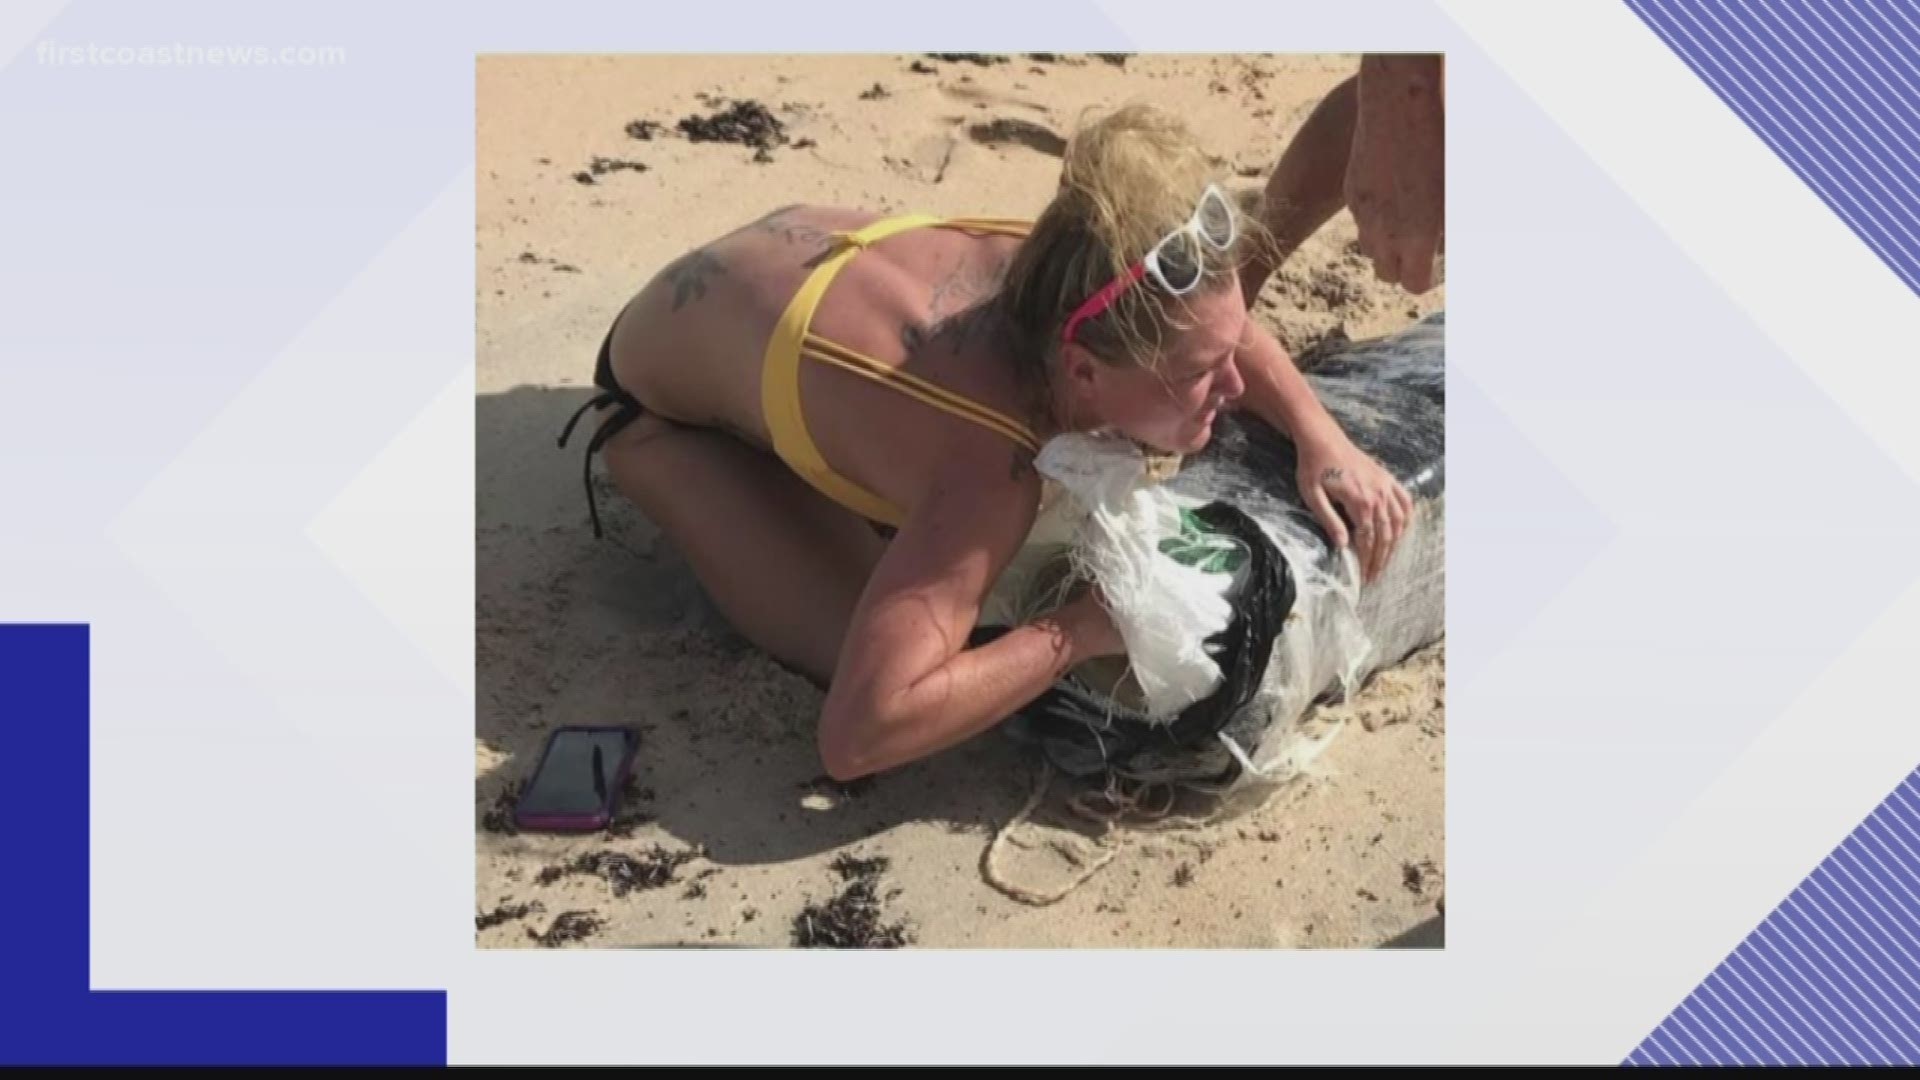 Over 100 pounds of marijuana have washed up on First Coast shores, and police are warning citizens to call their local authorities instead of taking it for themselves.